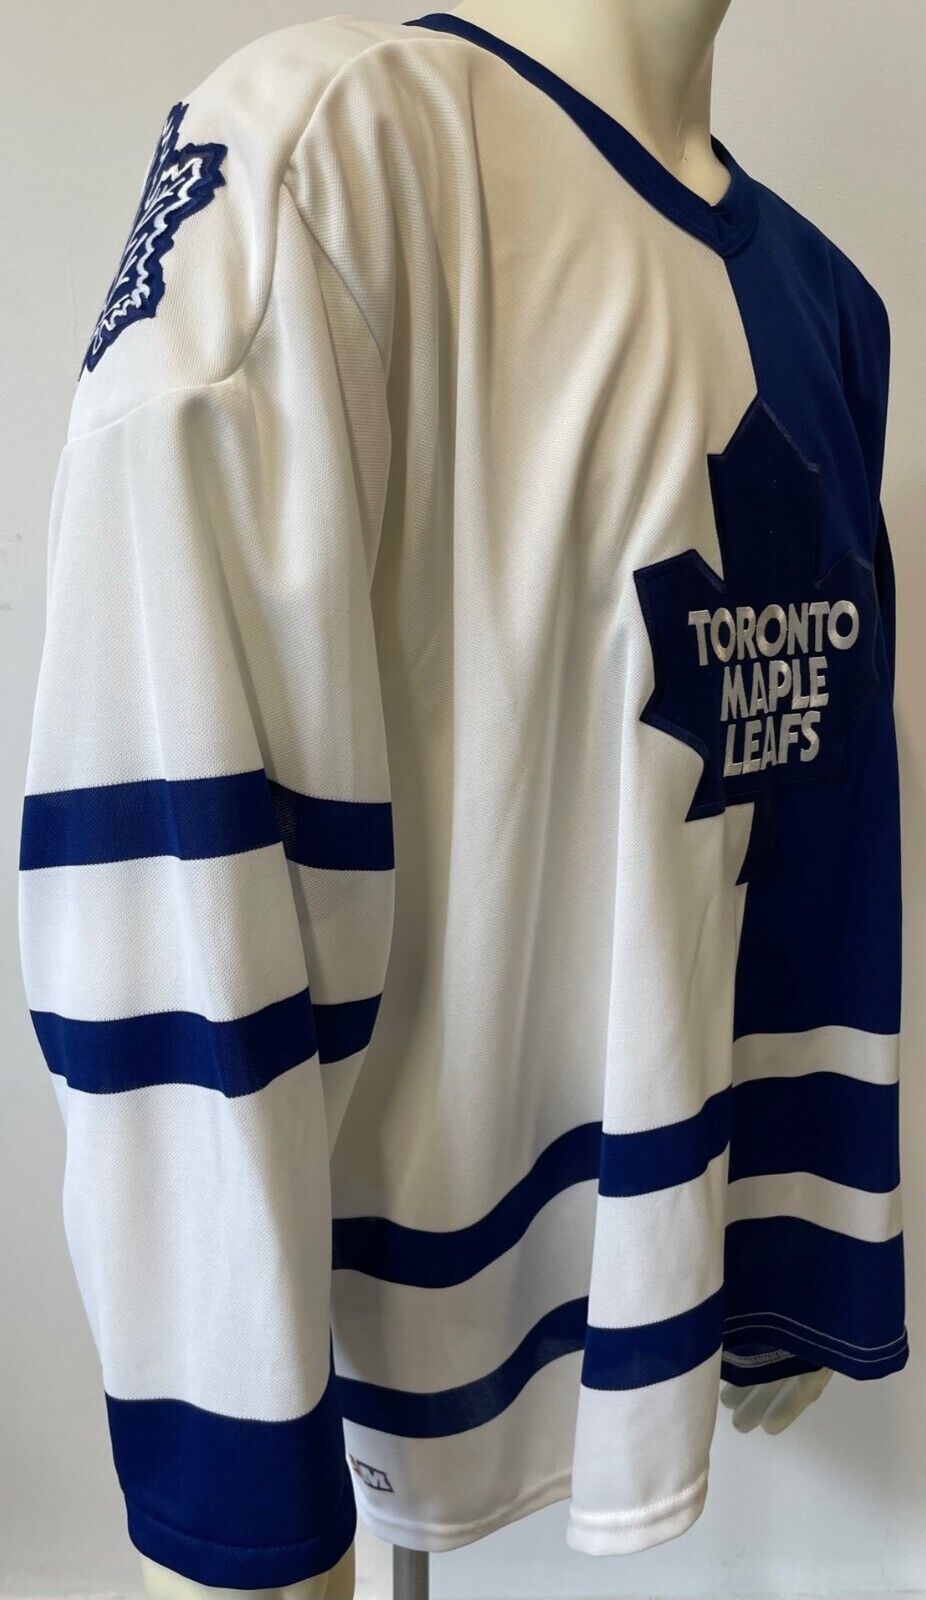 Toronto Maple Leafs Vintage CCM Hockey Jersey - Made in Canada